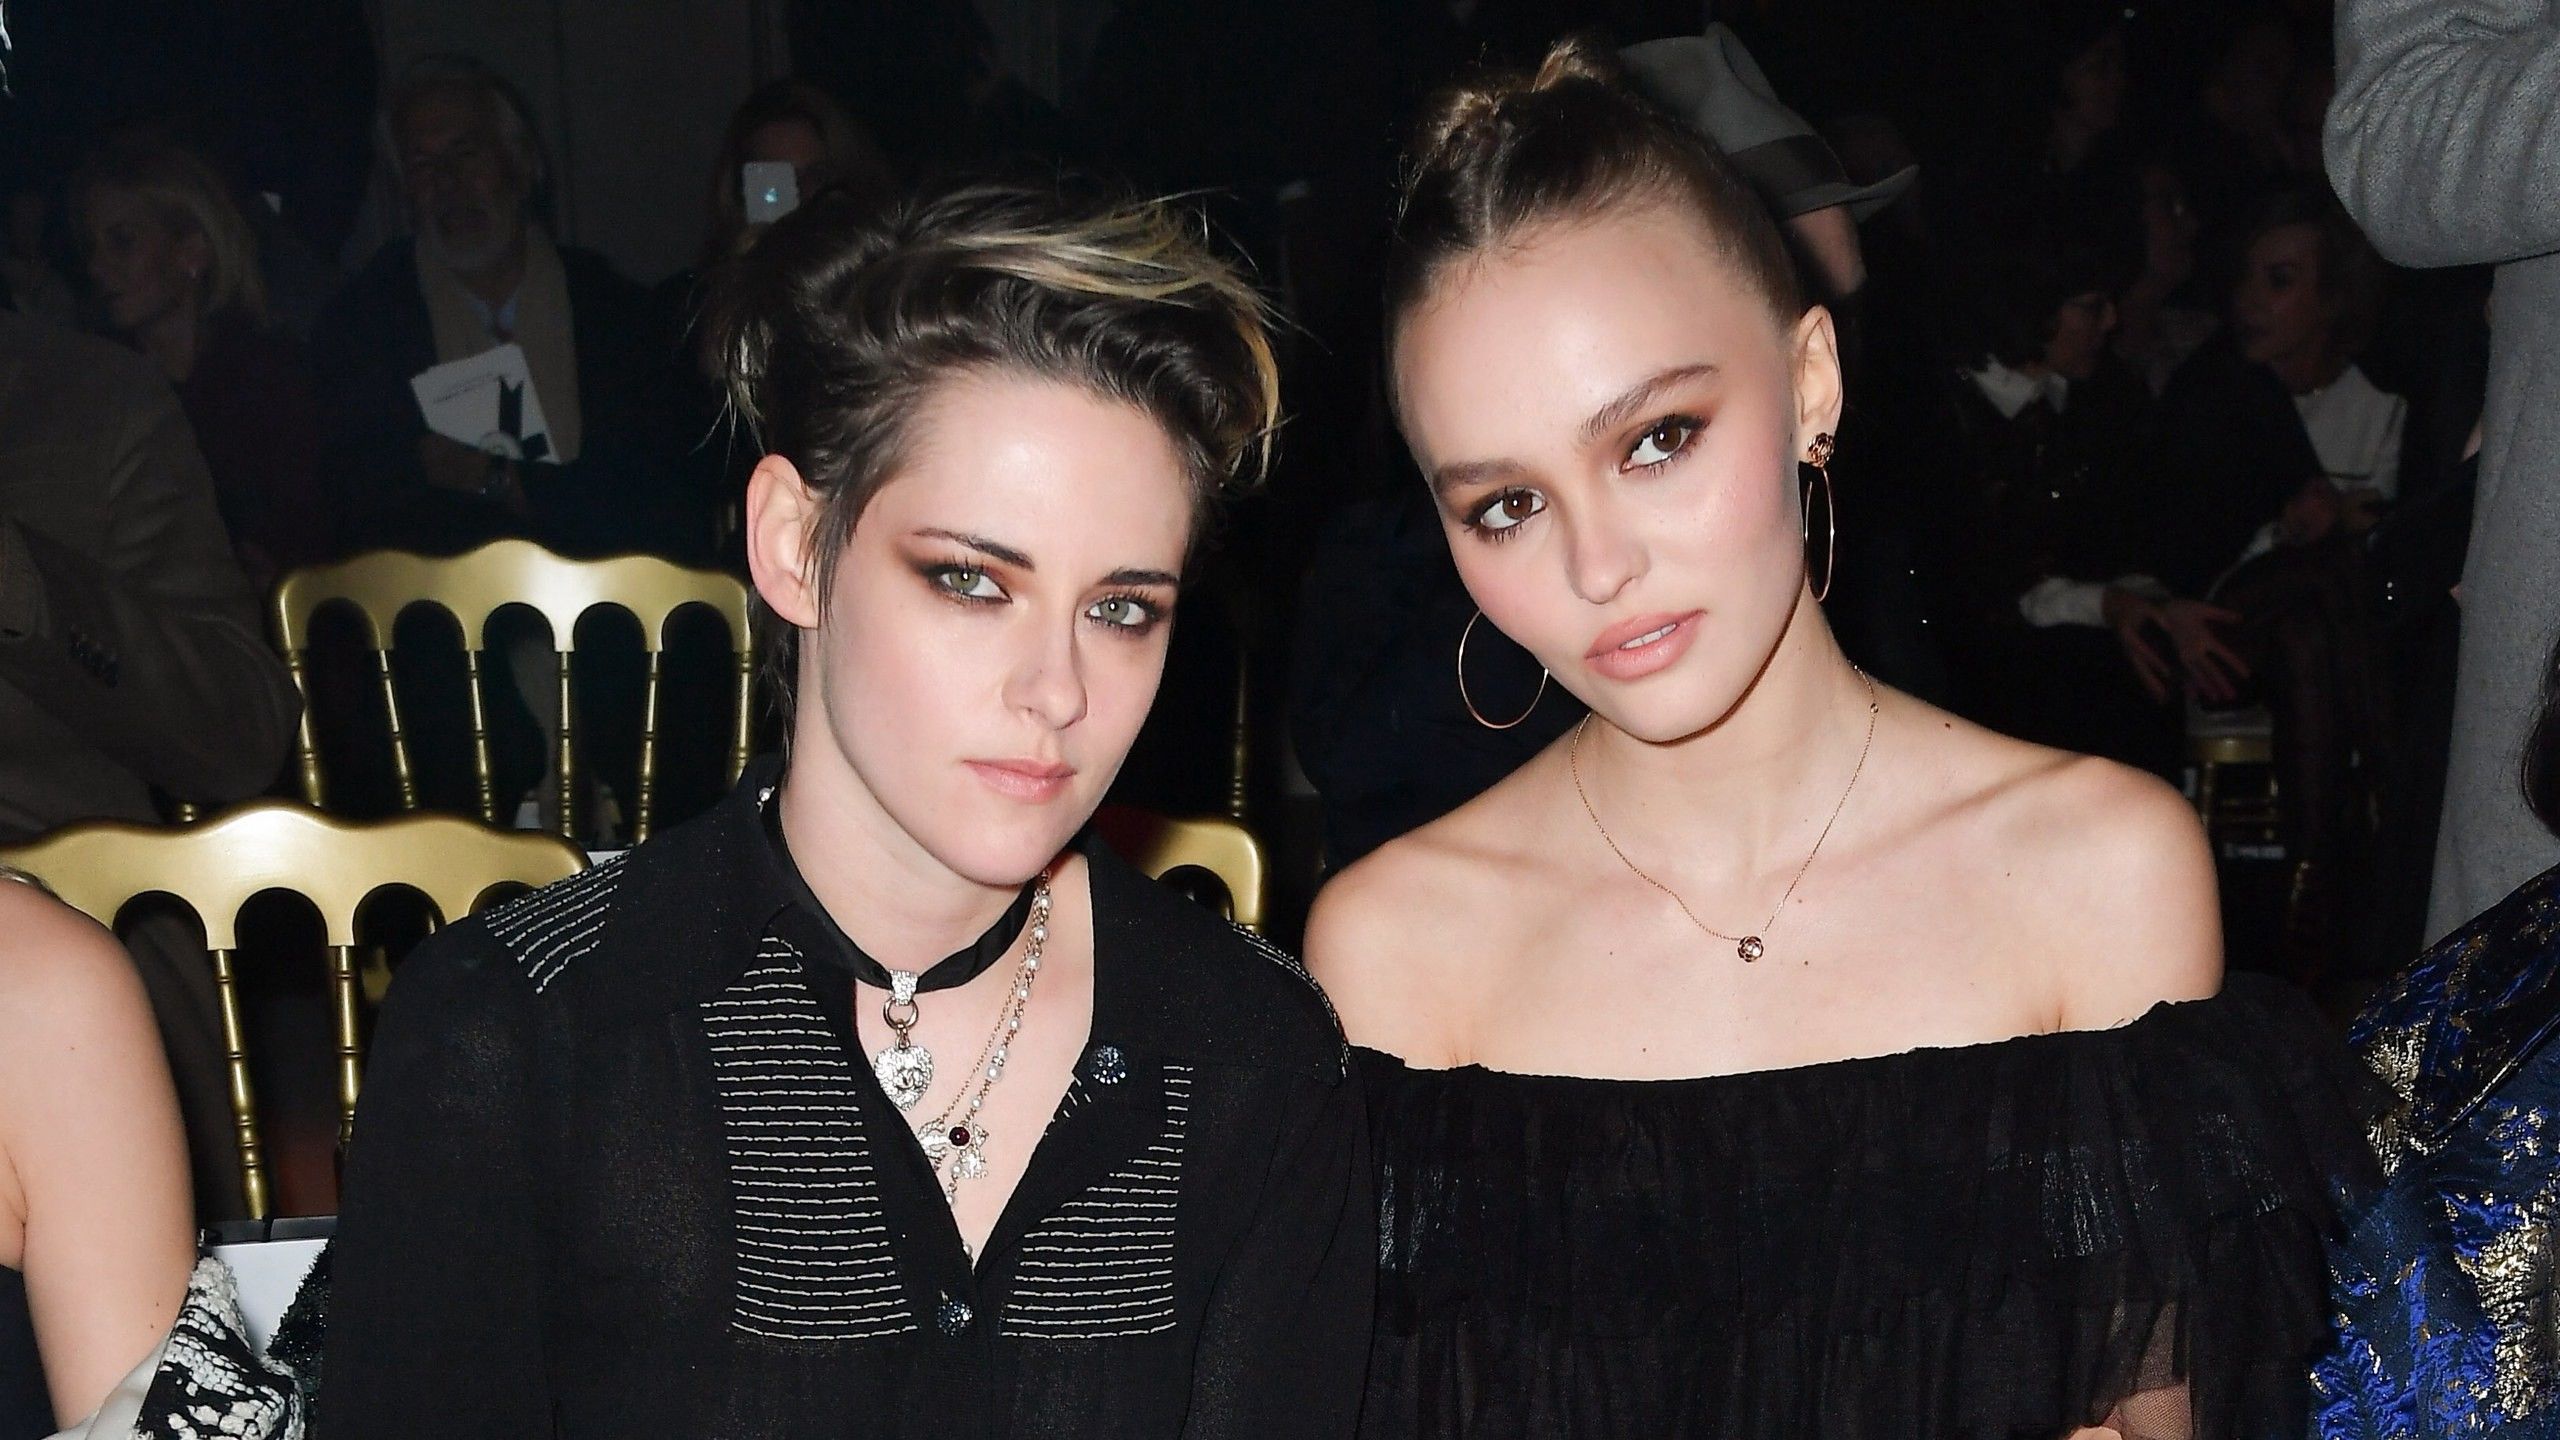 Kristen Stewart And Lily Rose Depp Are The Coolest Friendship At The Forefront Of Fashion. By Yasir Ali